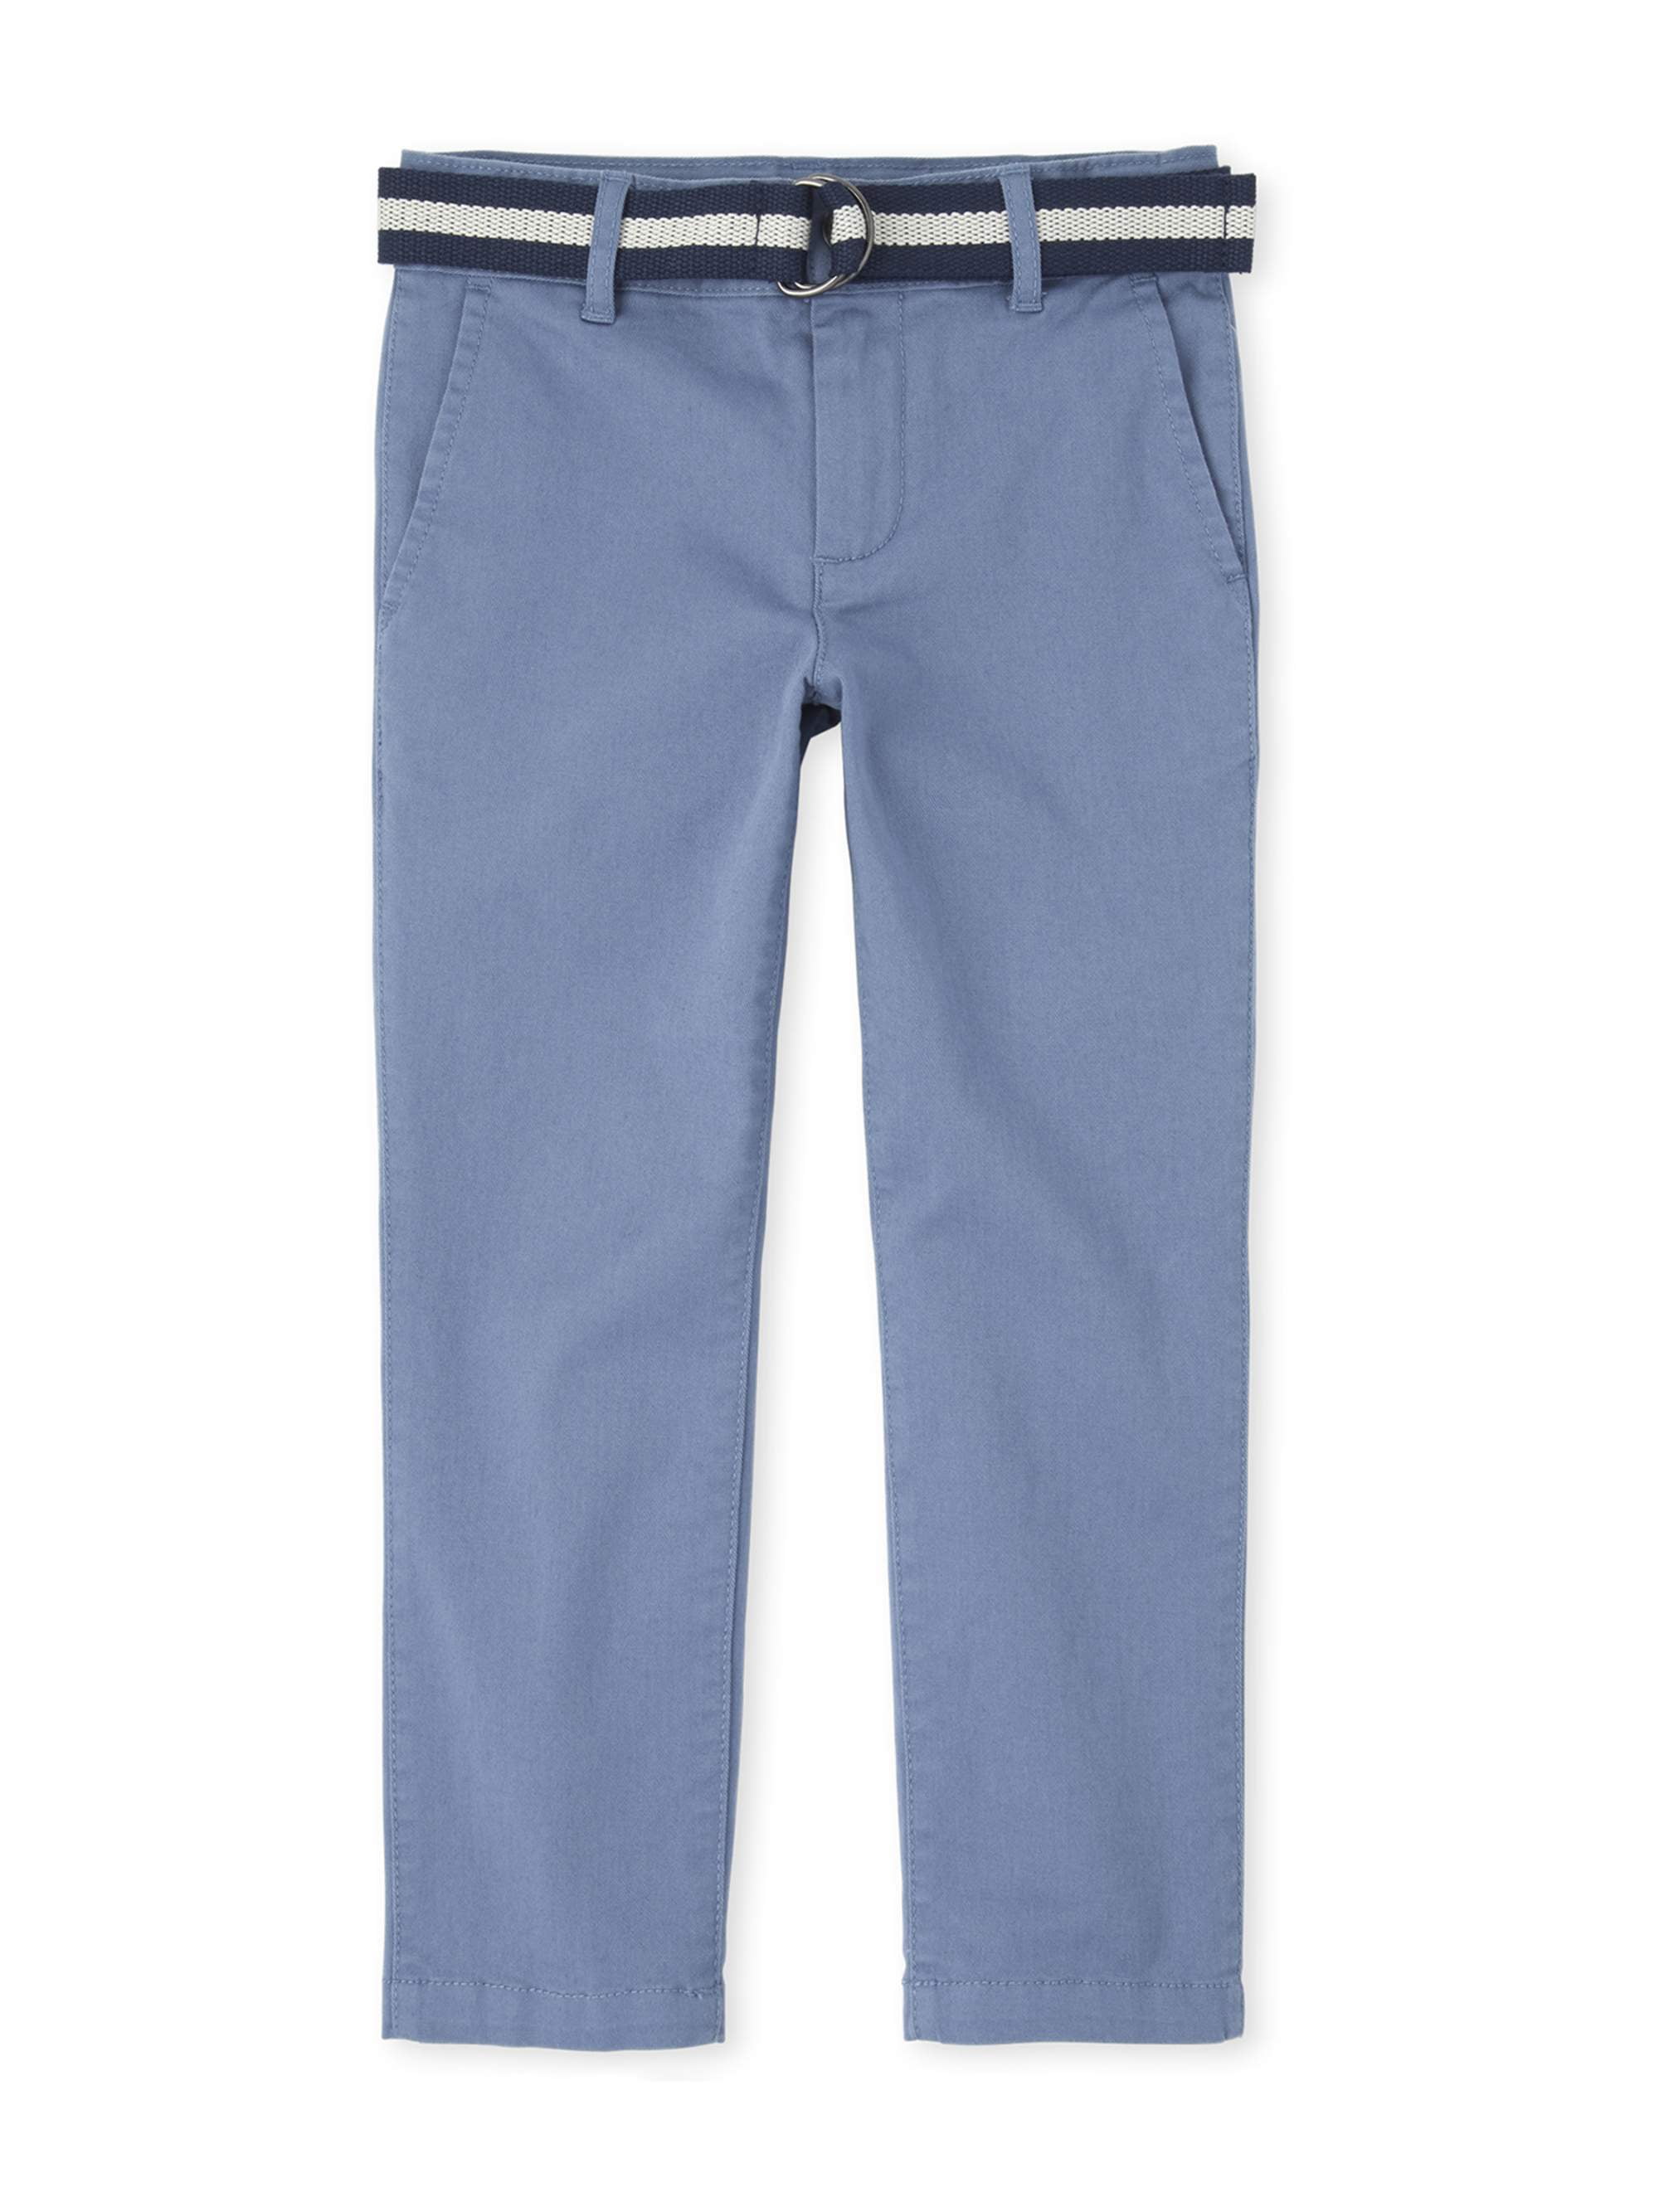 Amazon.com: The Children's Place boys Uniform Chino Pants, Fin Gray, 4 US:  Clothing, Shoes & Jewelry